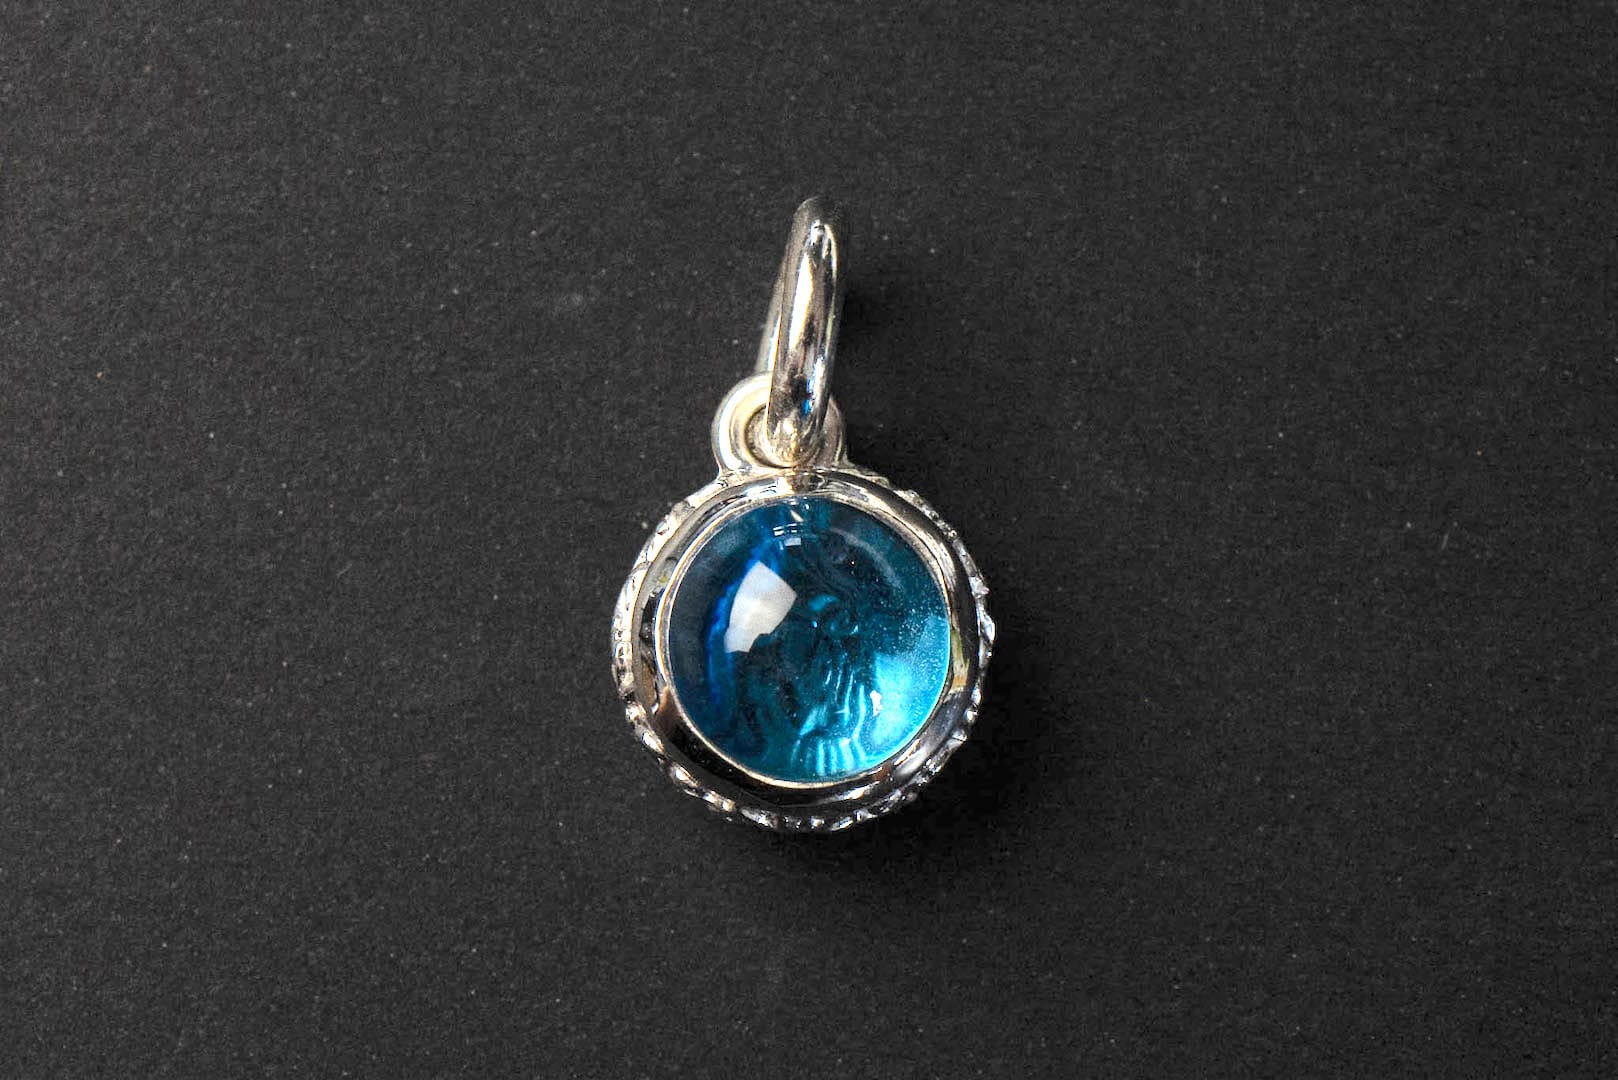 Legend 20th Anniversary Ultimate "Flora" Pendant With Ultra-Large Blue Topaz (Limited Edition)